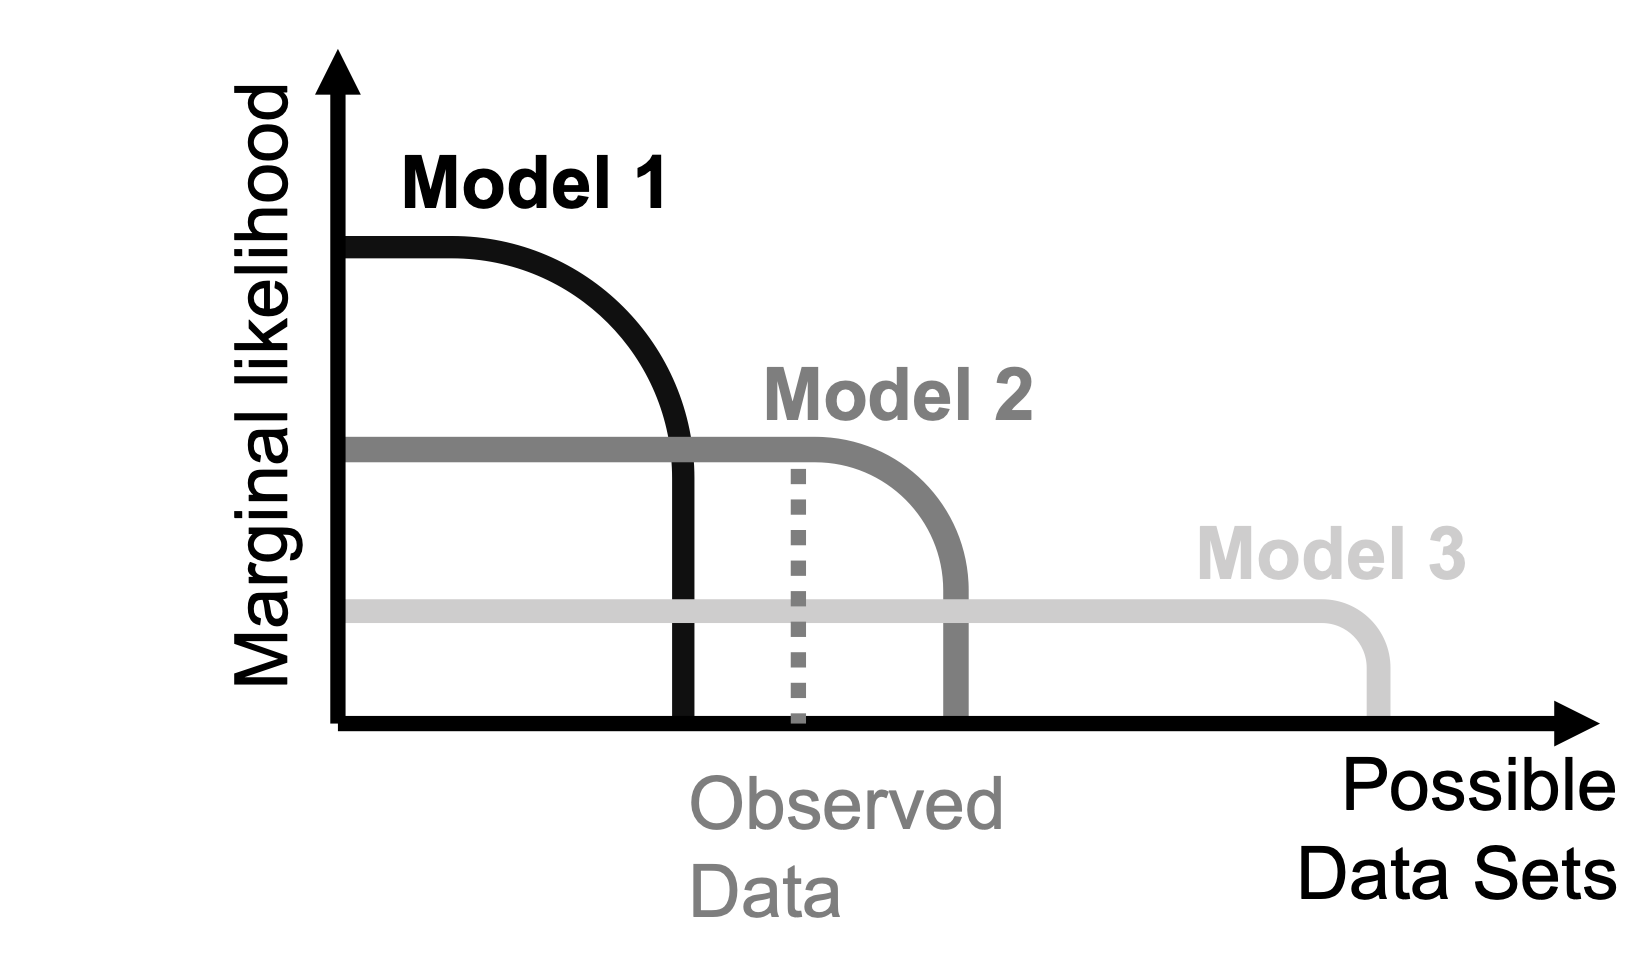 Shown are the schematic marginal likelihoods that each of three models assigns to different possible data sets. The total probability each model assigns to the data is equal to one, i.e., the areas under the curves of all three models are the same. Model 1 (black), the low complexity model, assigns all the probability to a narrow range of possible data, and can predict these possible data sets with high likelihood. Model 3 (light grey) assigns its probability to a large range of different possible outcomes, but predicts each individual observed data set with low likelihood (high complexity model). Model 2 (dark grey) takes an intermediate position (intermediate complexity). The vertical dashed line (dark grey) illustrates where the actual empirically observed data fall. The data most support model 2, since this model predicts the data with highest likelihood. The figure is closely based on Figure 3.13 in Bishop (2006).